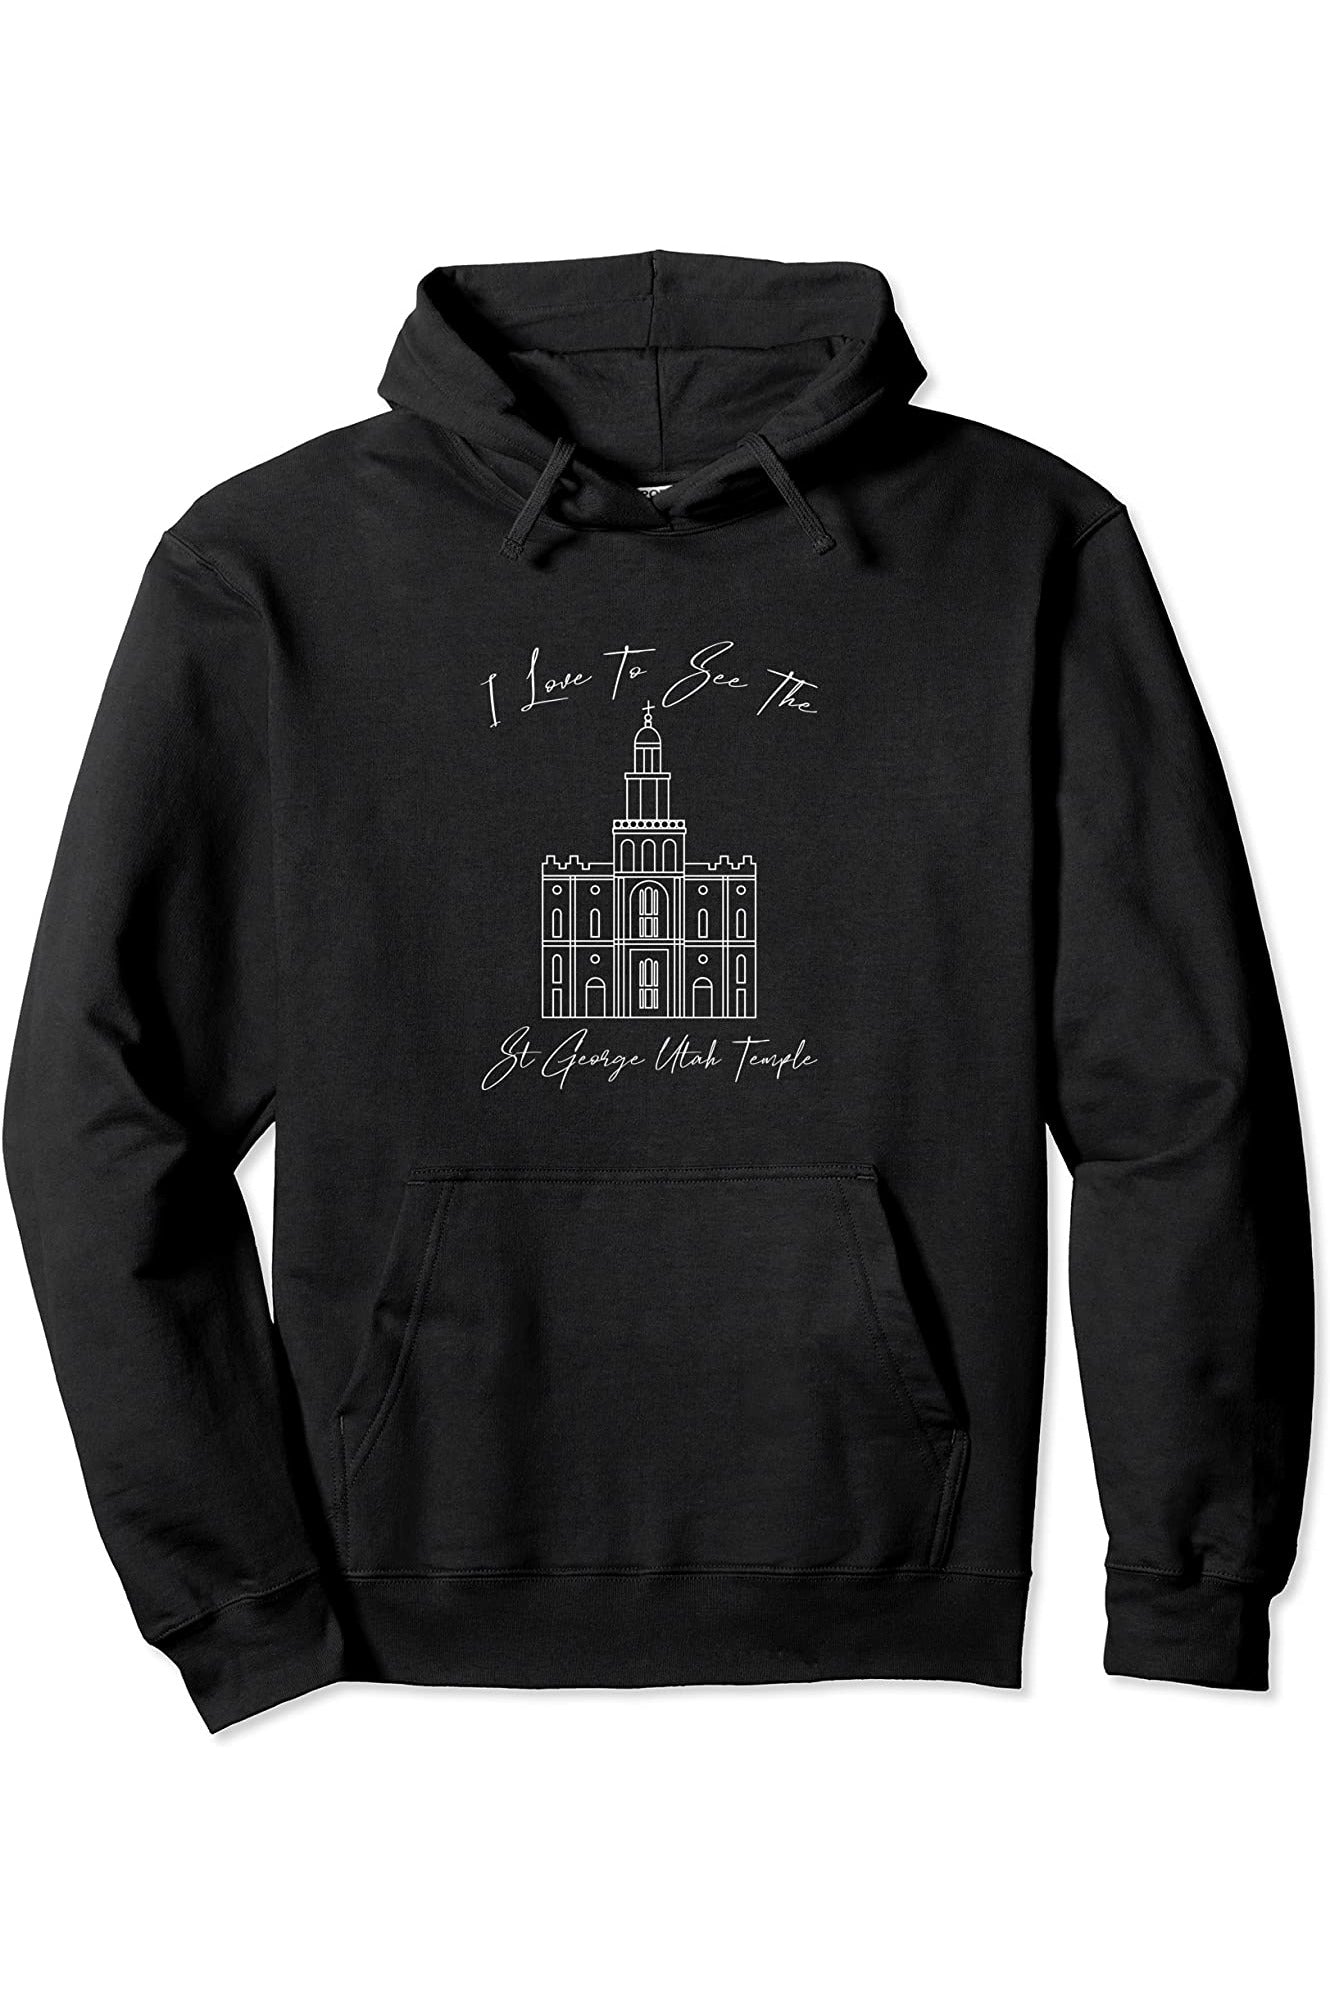 St George Utah Temple Pullover Hoodie - Calligraphy Style (English) US